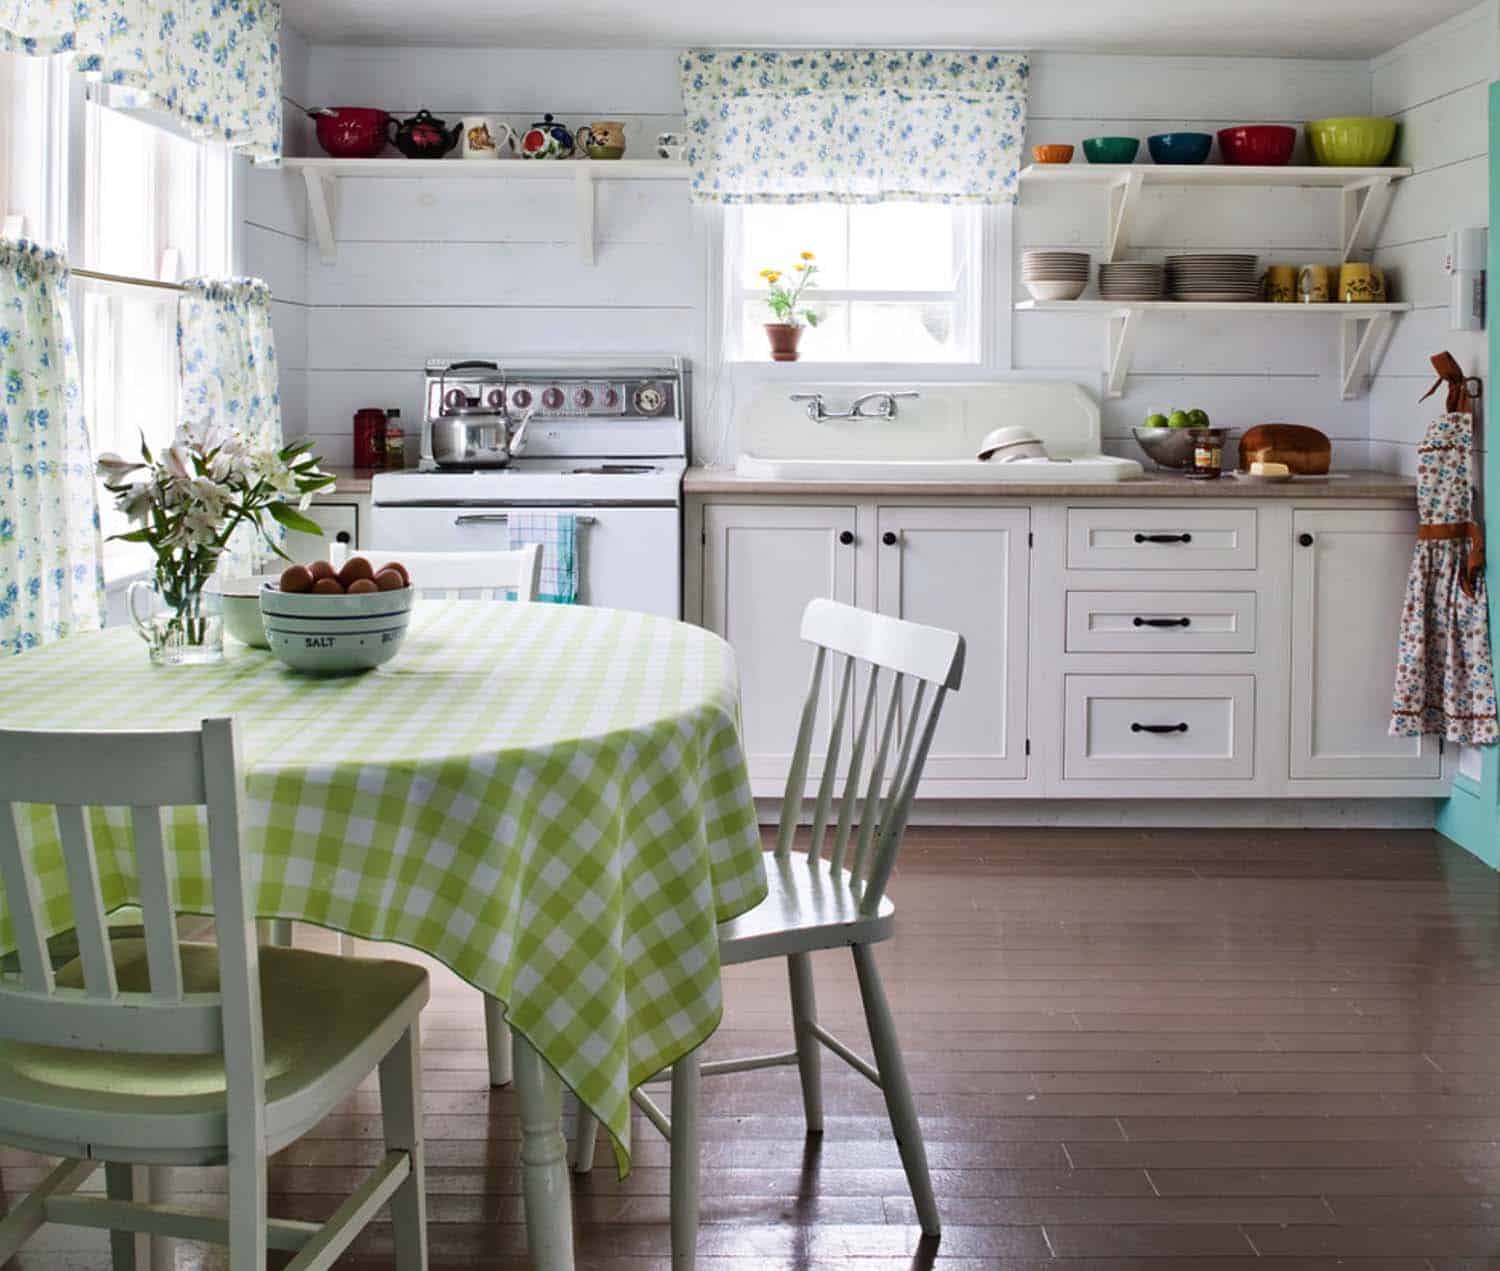 Amazing Country Chic Kitchens-23-1 Kindesign